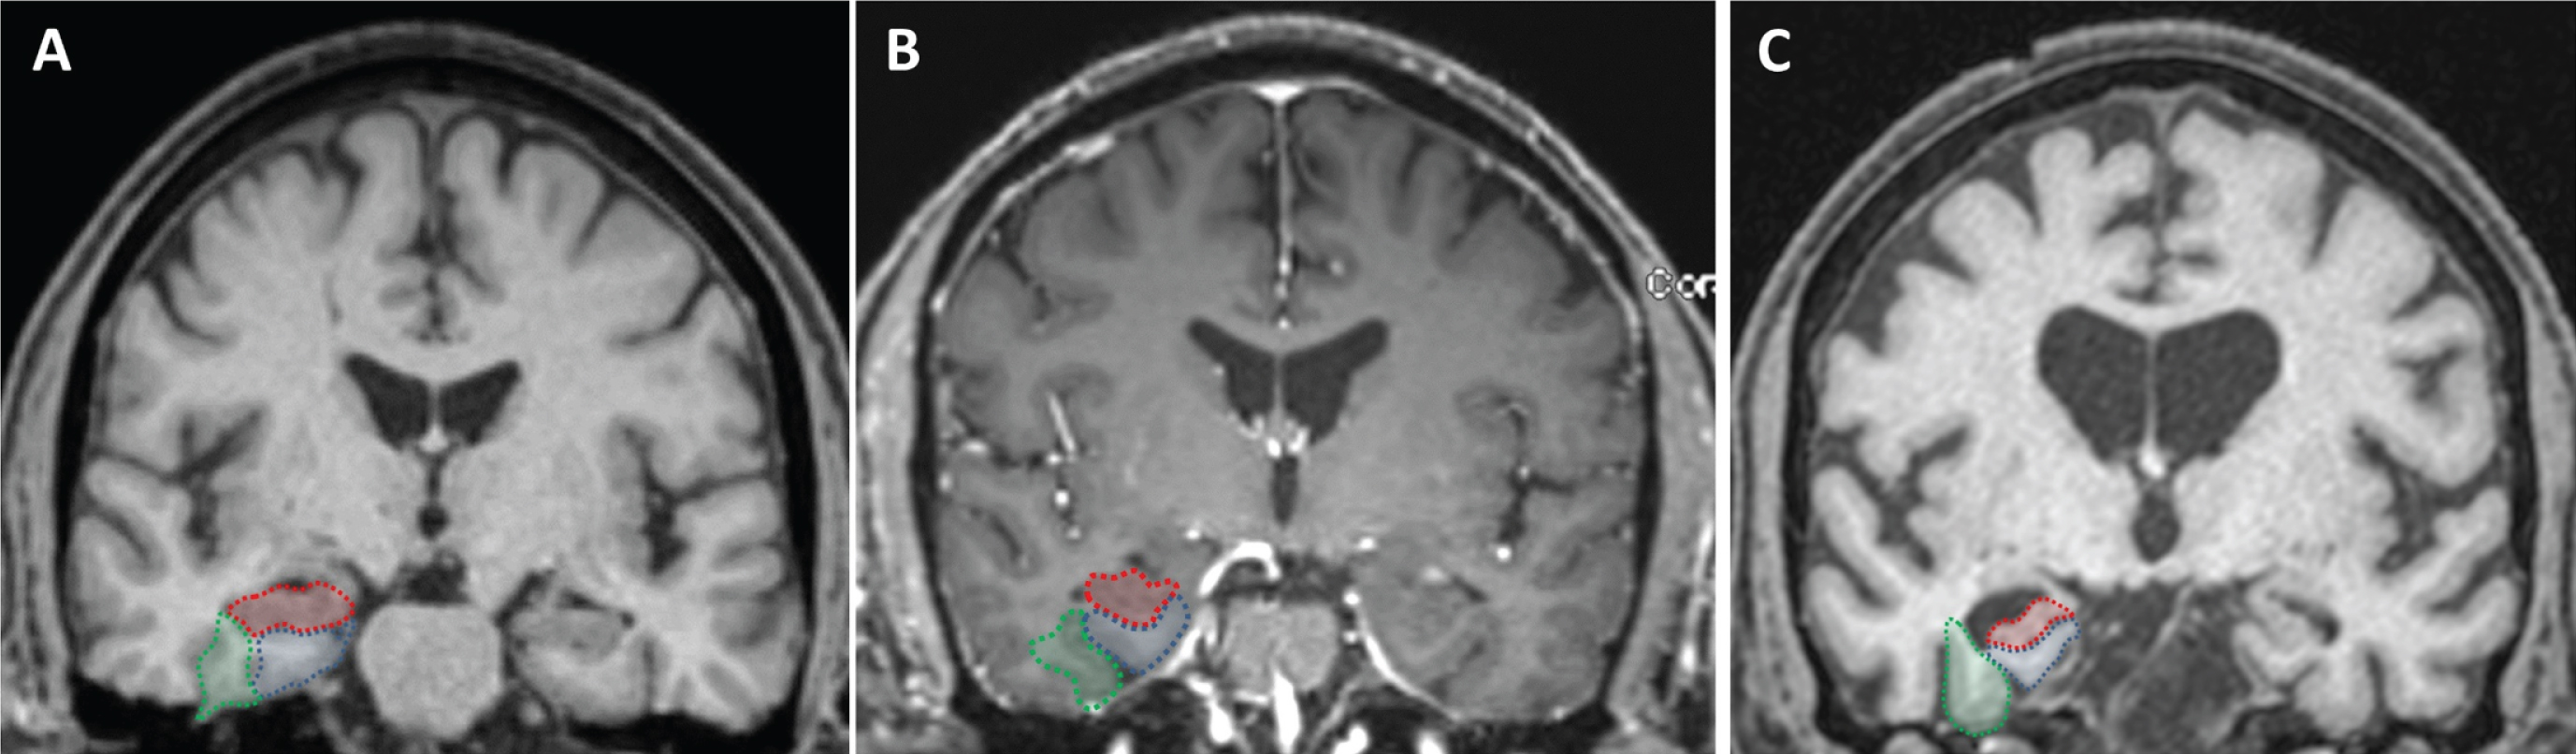 Visual rating system for assessing medial temporal atrophy. The three regions of interest are outlined in the right hemisphere in color (hippocampus in red; entorhinal cortex in blue; perirhinal cortex in green). Control subject (A) and subject with MCI (B), all showing no atrophy (MTA score = 0) in both hemispheres. Subject with dementia (C), all structures have atrophy (right MTA score = 3.3 and left MTA score = 2.3).